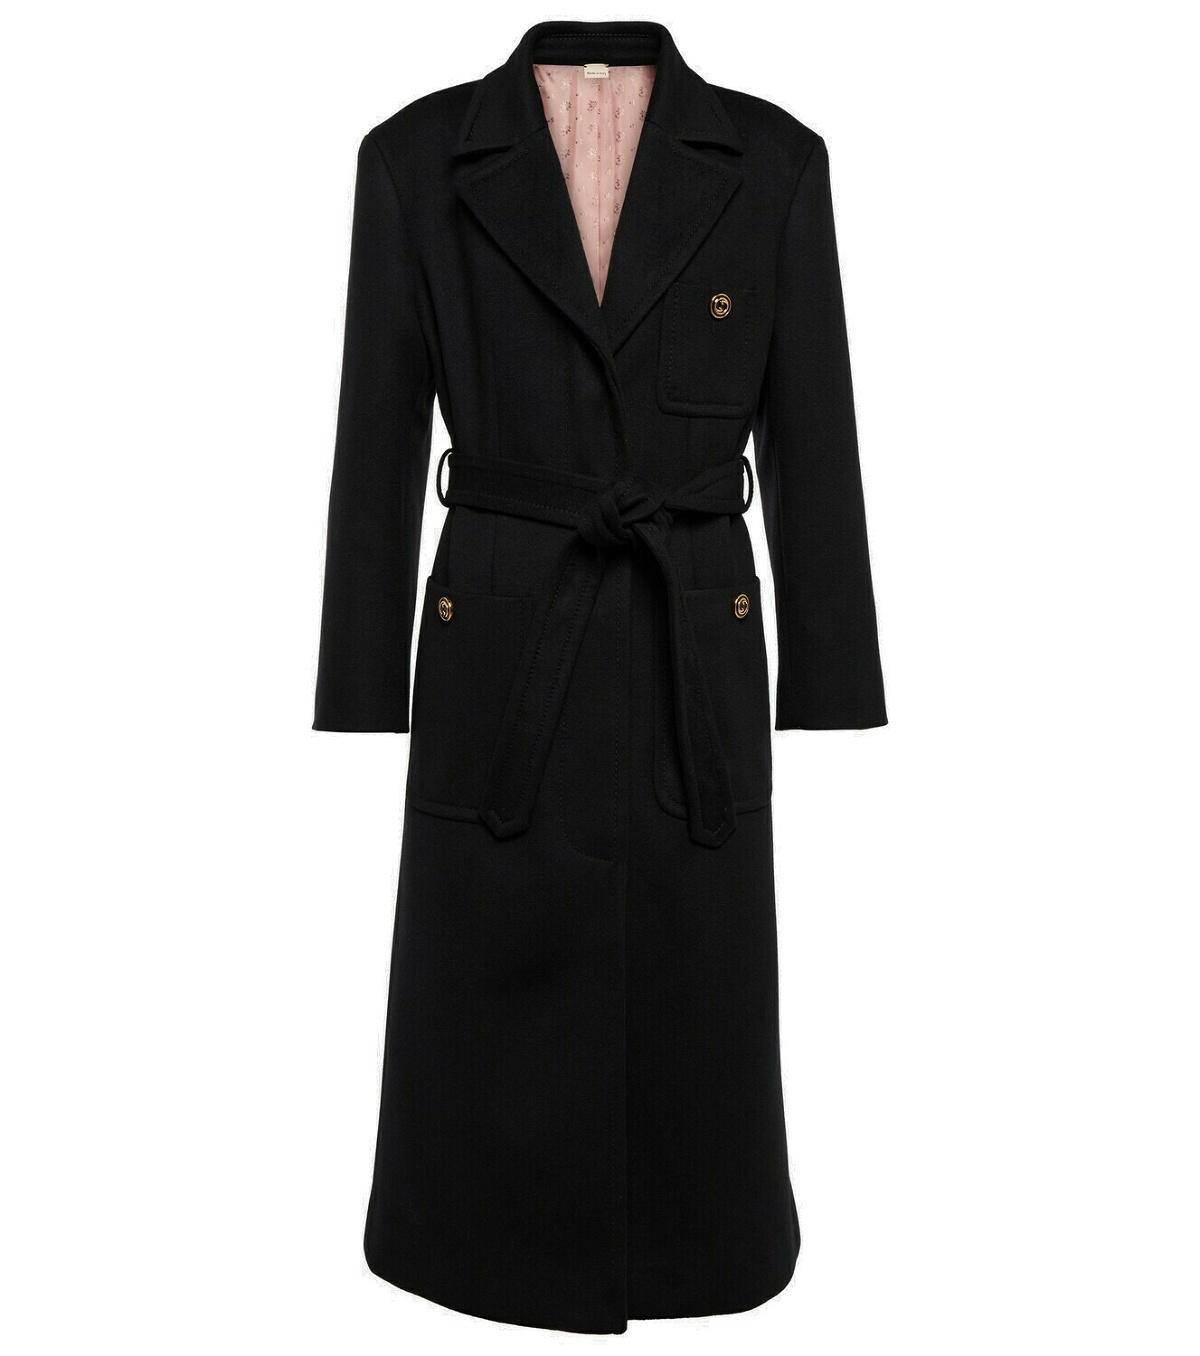 Gucci - GG belted wool coat Gucci